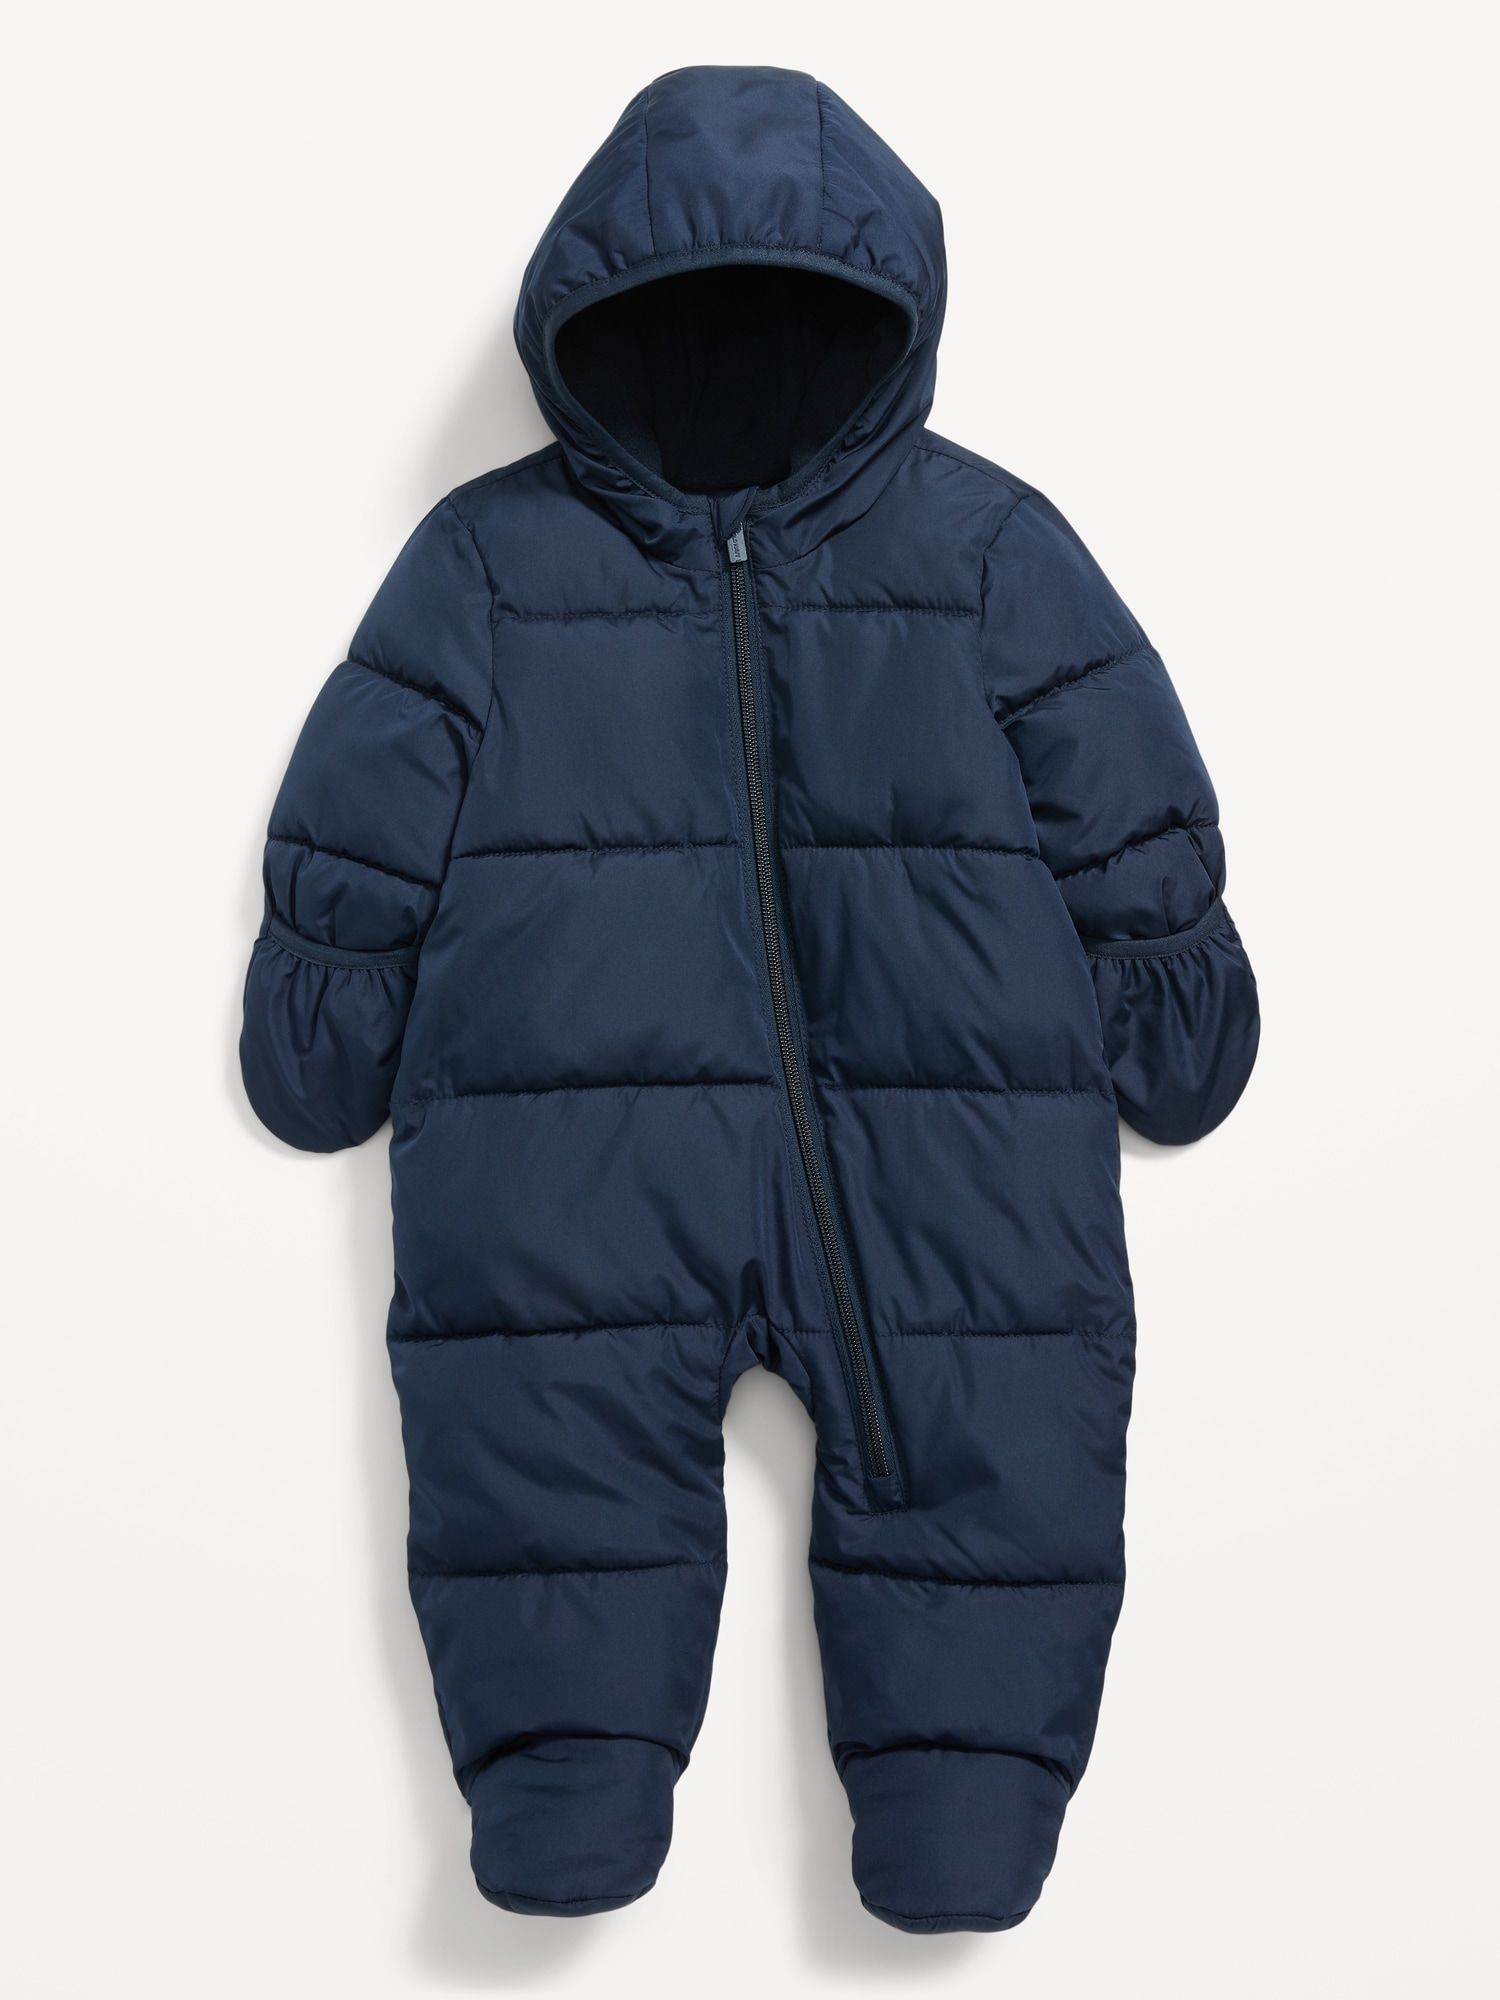 Unisex Water-Resistant Hooded Snowsuit for Baby | Old Navy